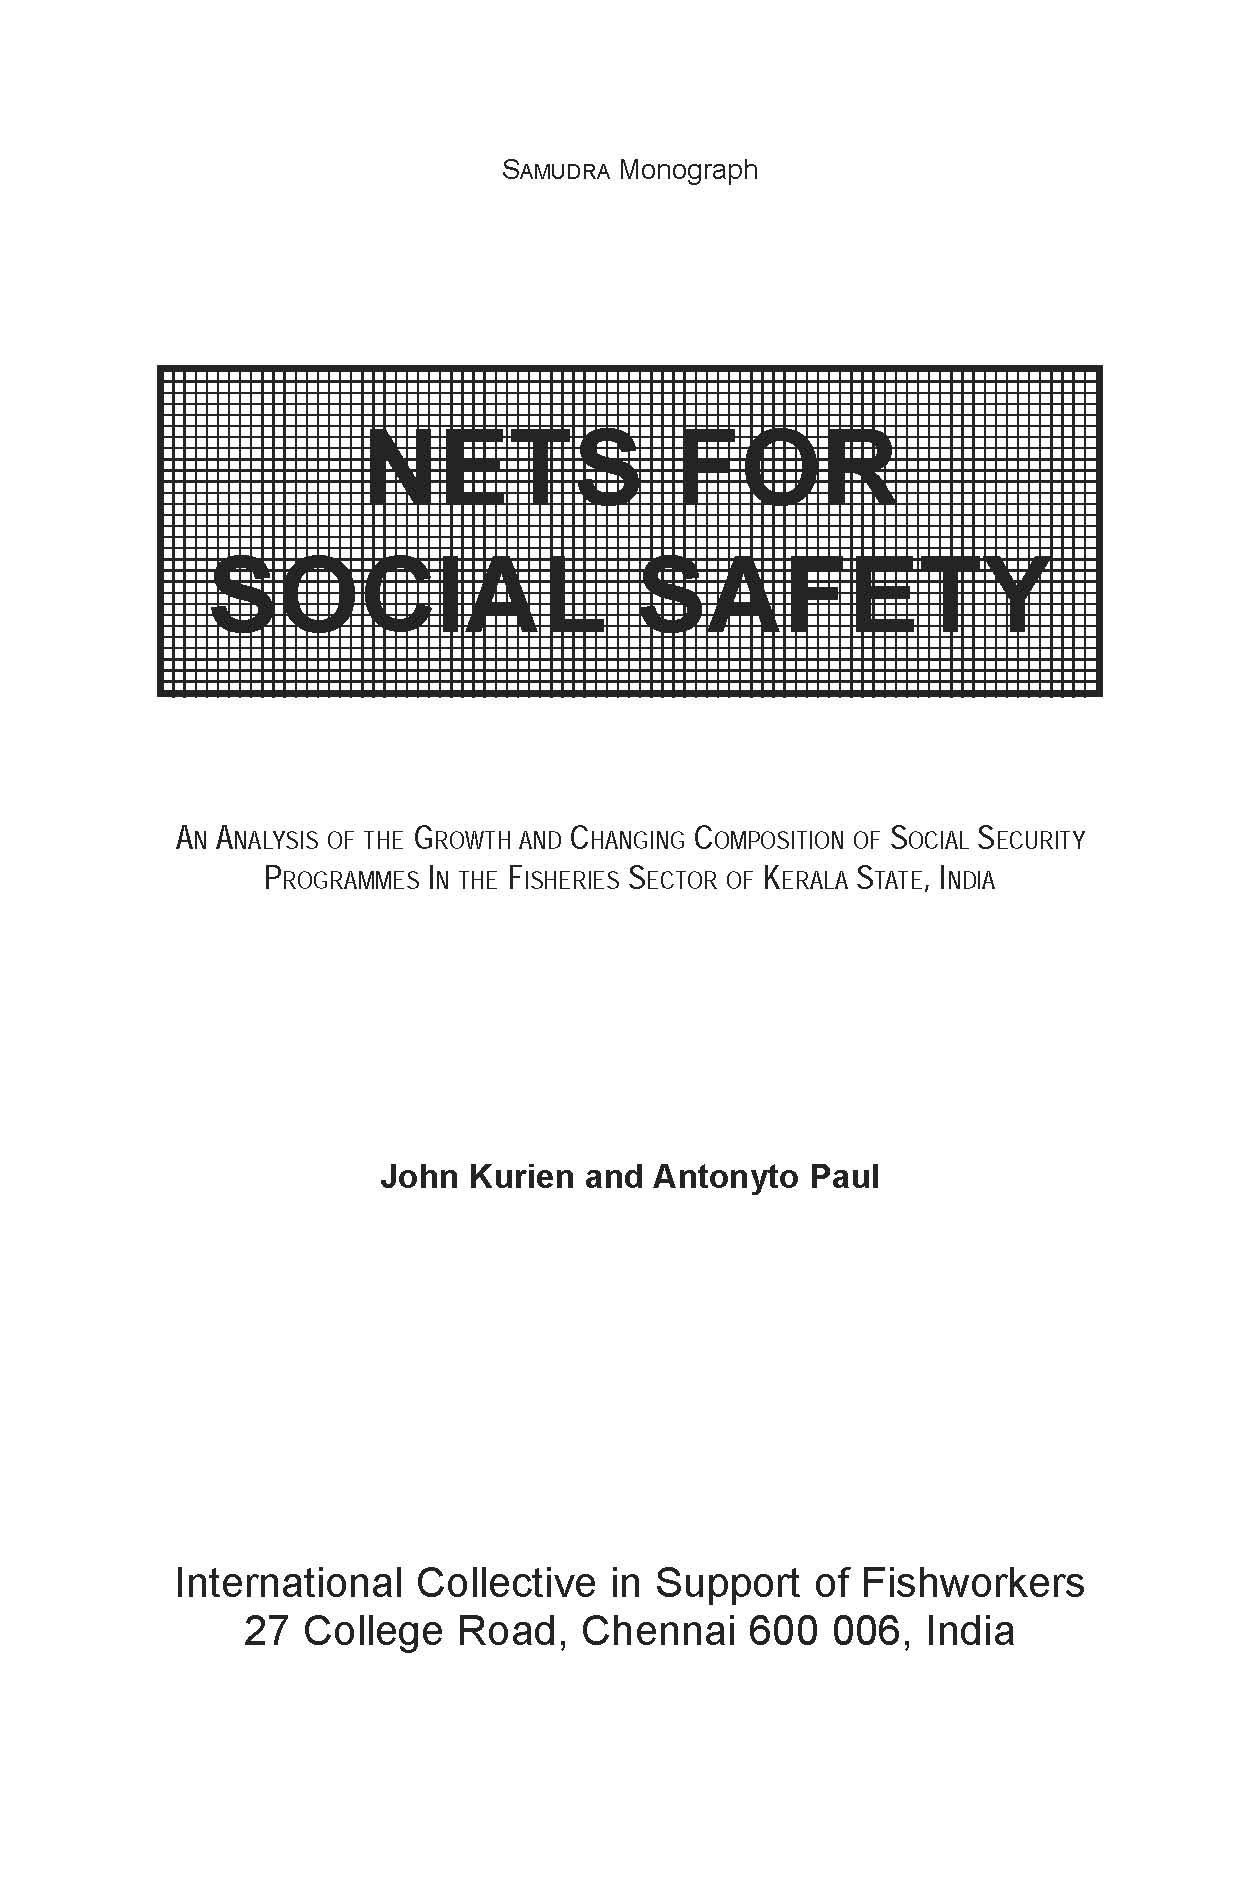 Nets for Social Safety – An Analysis of the Growth and Changing Composition of Social Security Programmes in the Fisheries Sector of Kerala State, India